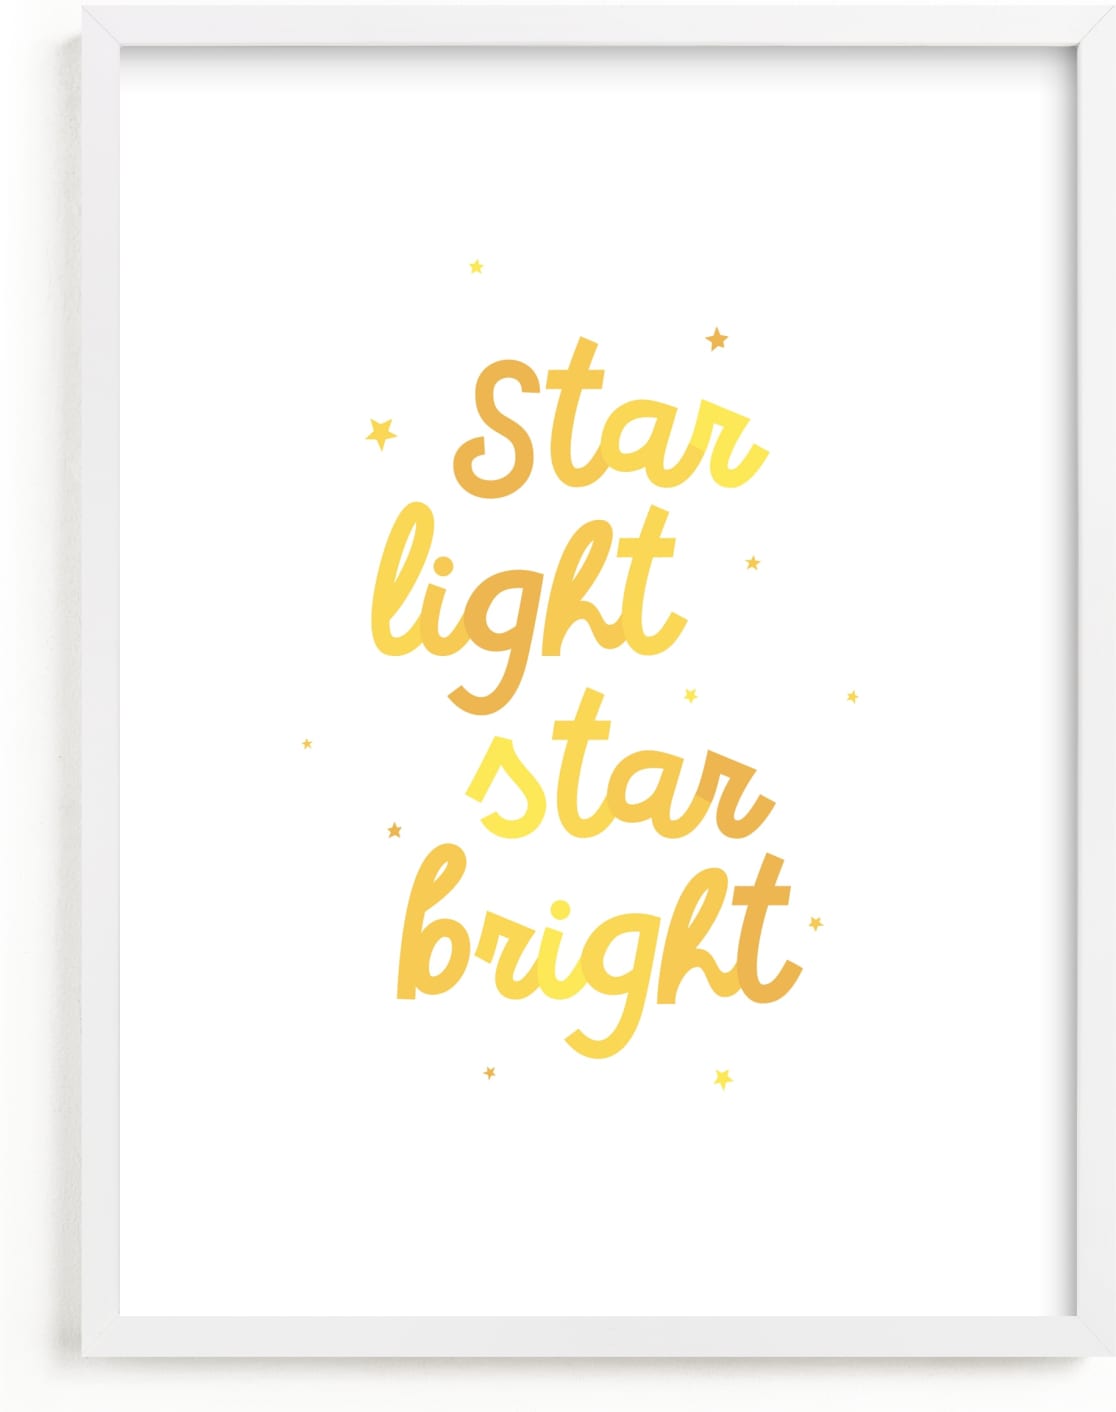 This is a yellow nursery wall art by Lea Delaveris called Star Light Star Bright.